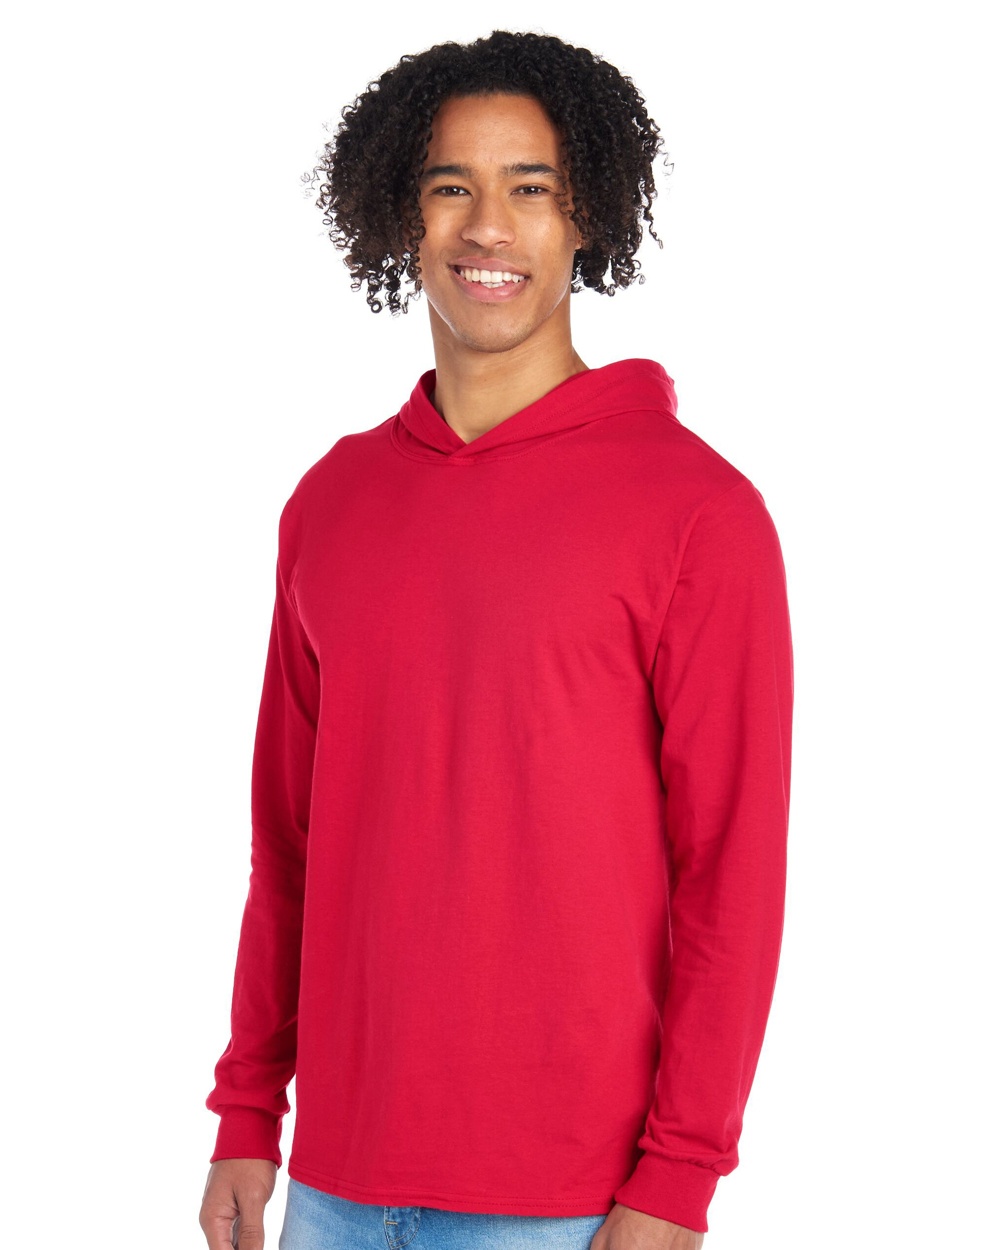 Fruit of The Loom 4930LSH - Men's HD Cotton Jersey Hooded T-Shirt True Red - L